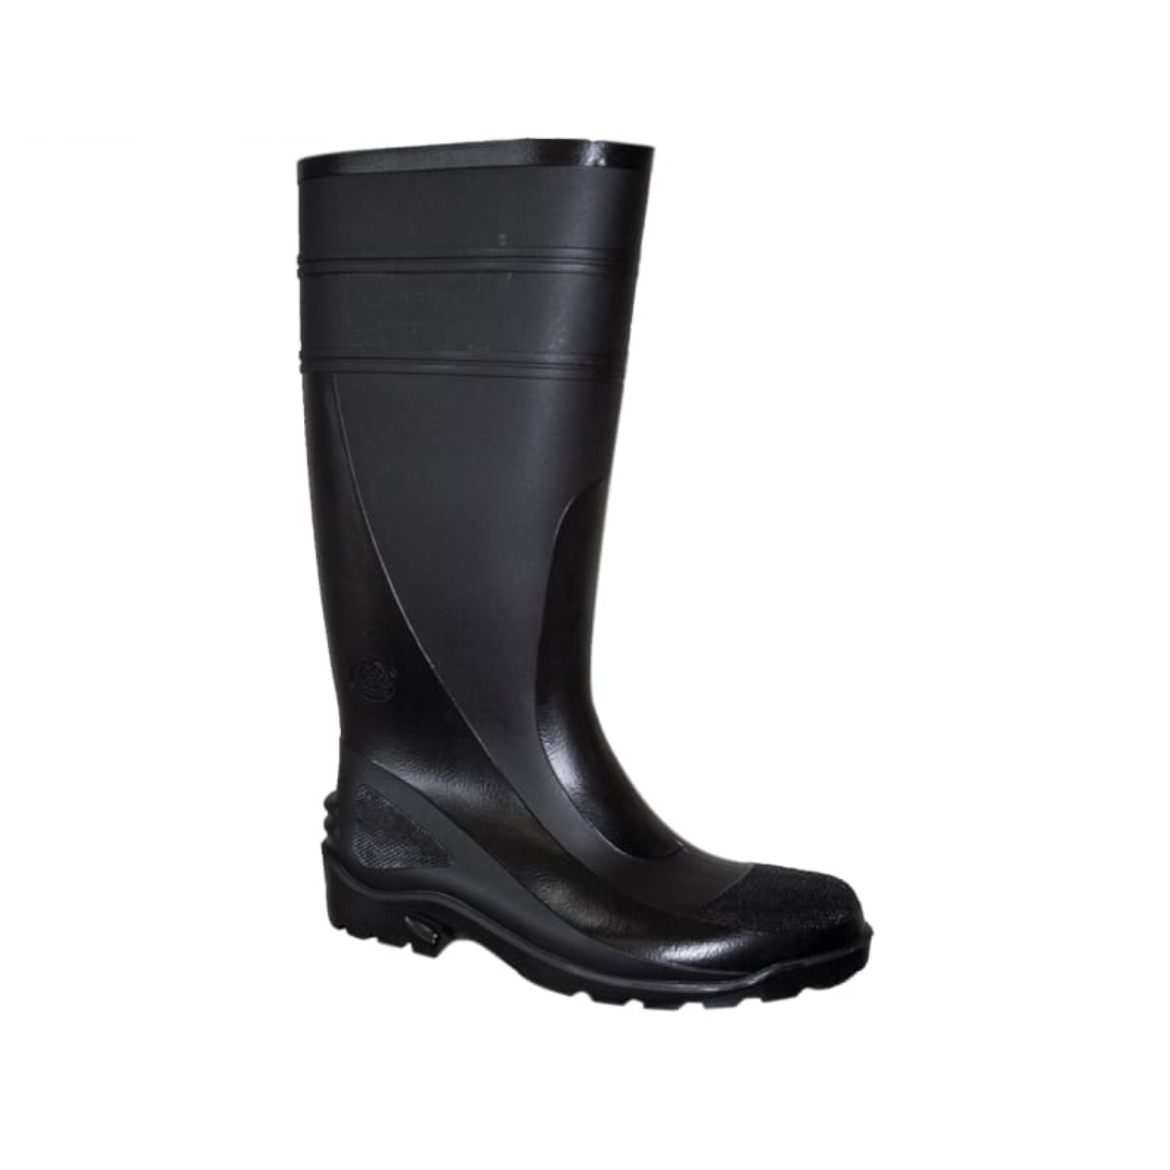 Picture of Bata Industrials, Handyman 400, Non-Safety Boot, PVC 400mm